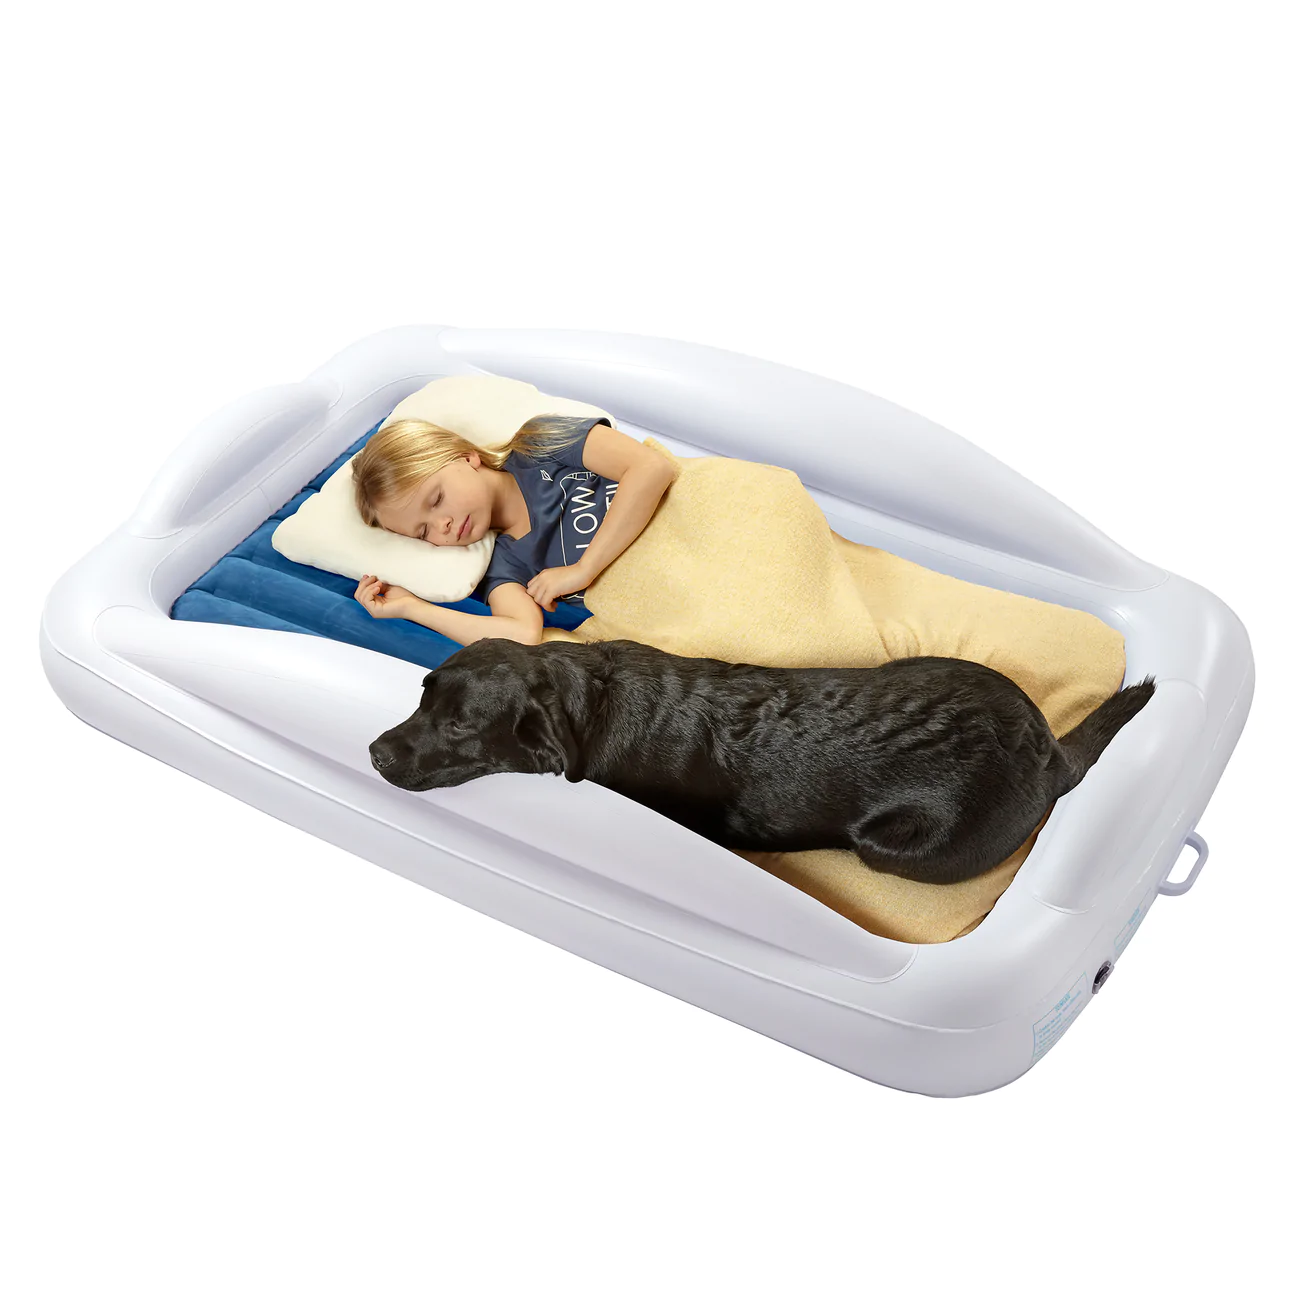 Inflatable Toddler Travel Bed hiccapop sleepy toddler